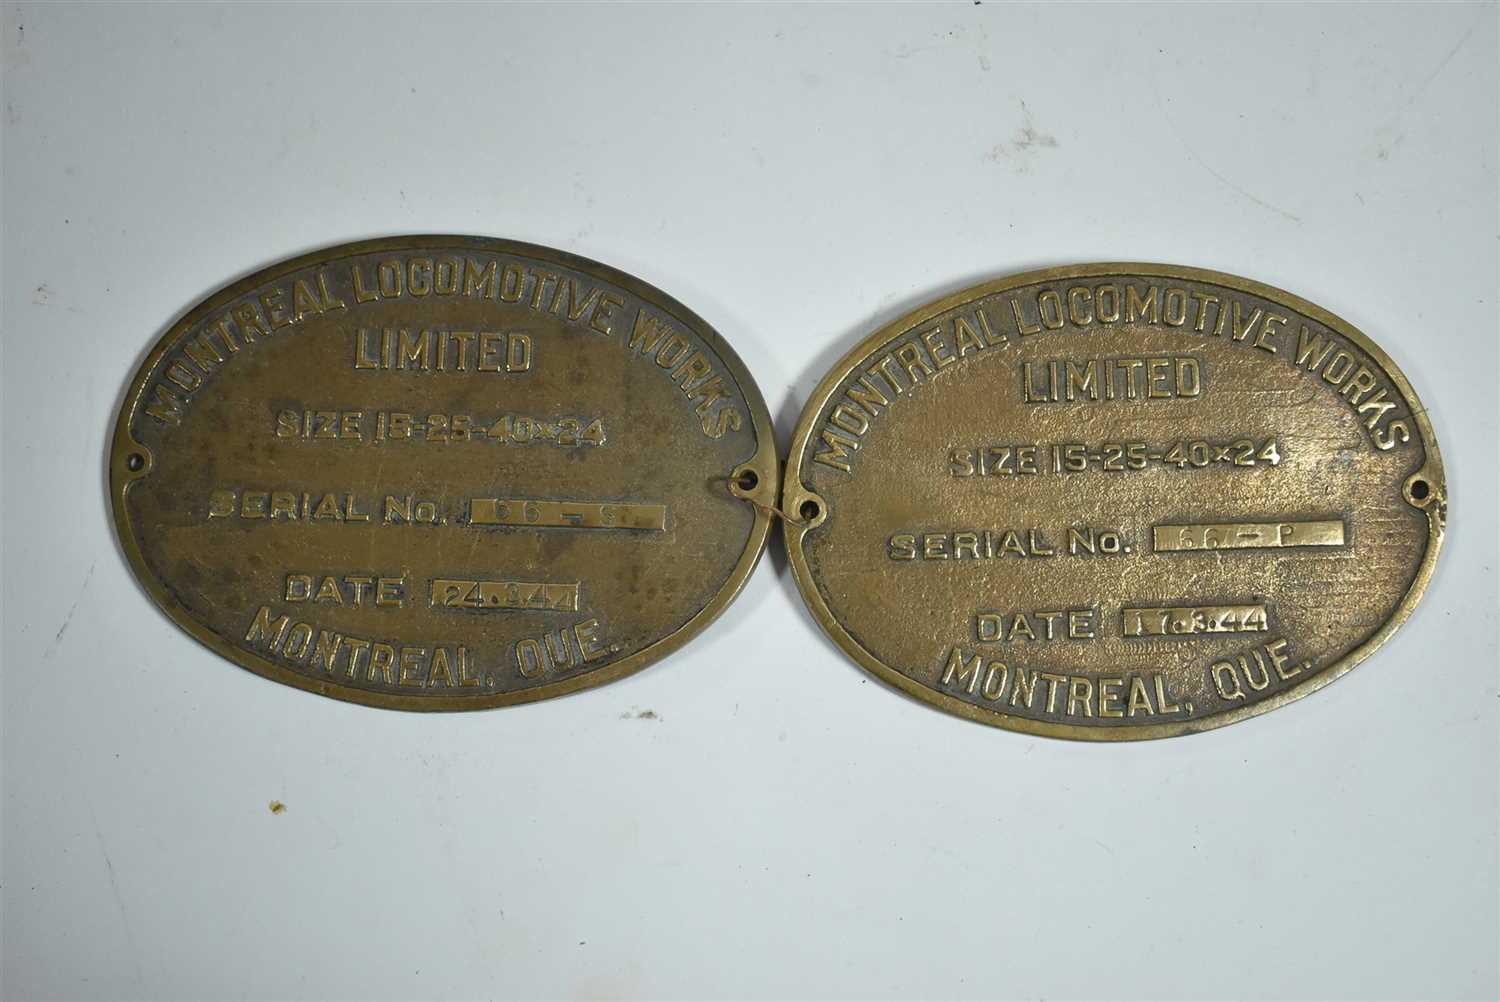 Lot 1447 - Engine Builder's Plates: Montreal Locomotive Works No. 66P and 66S.